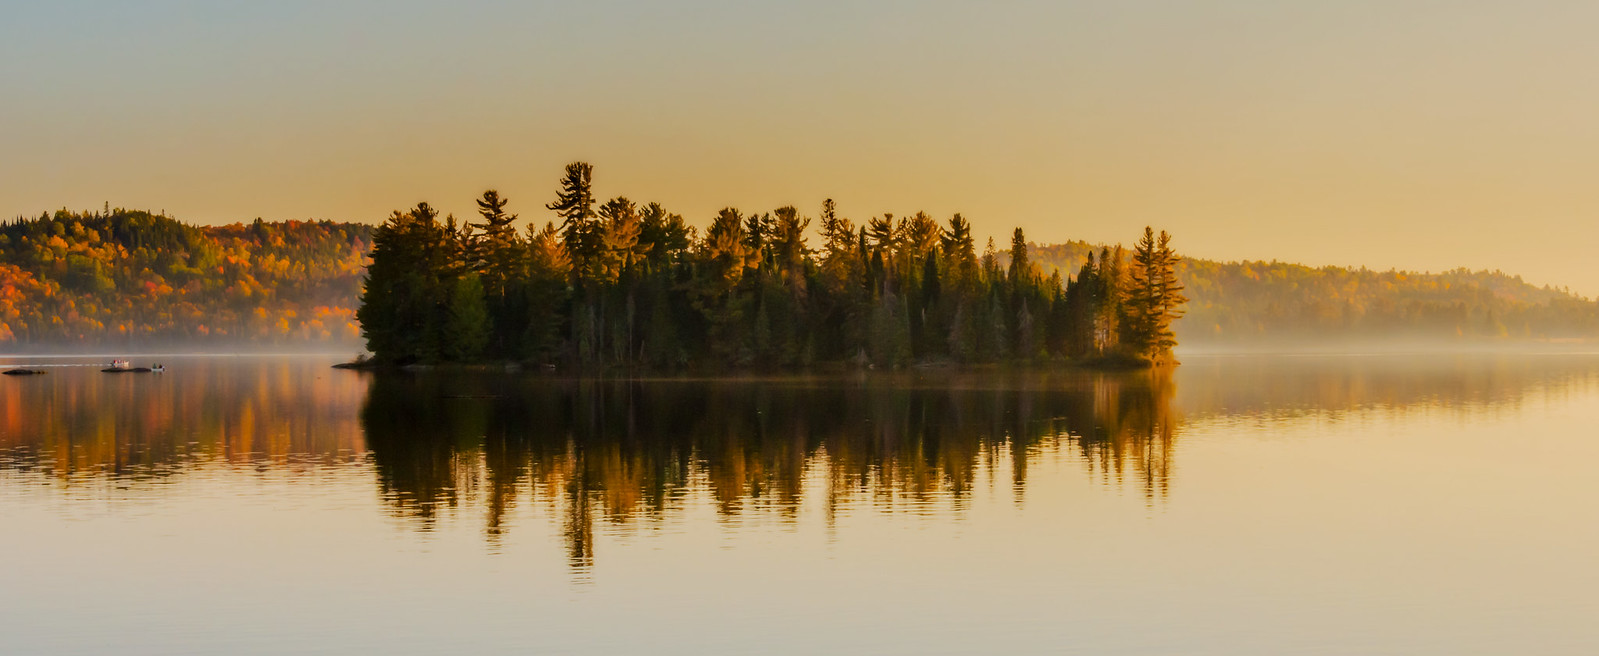 Misty lake view in the autumn in Algonquin Park, Ontario, Canada